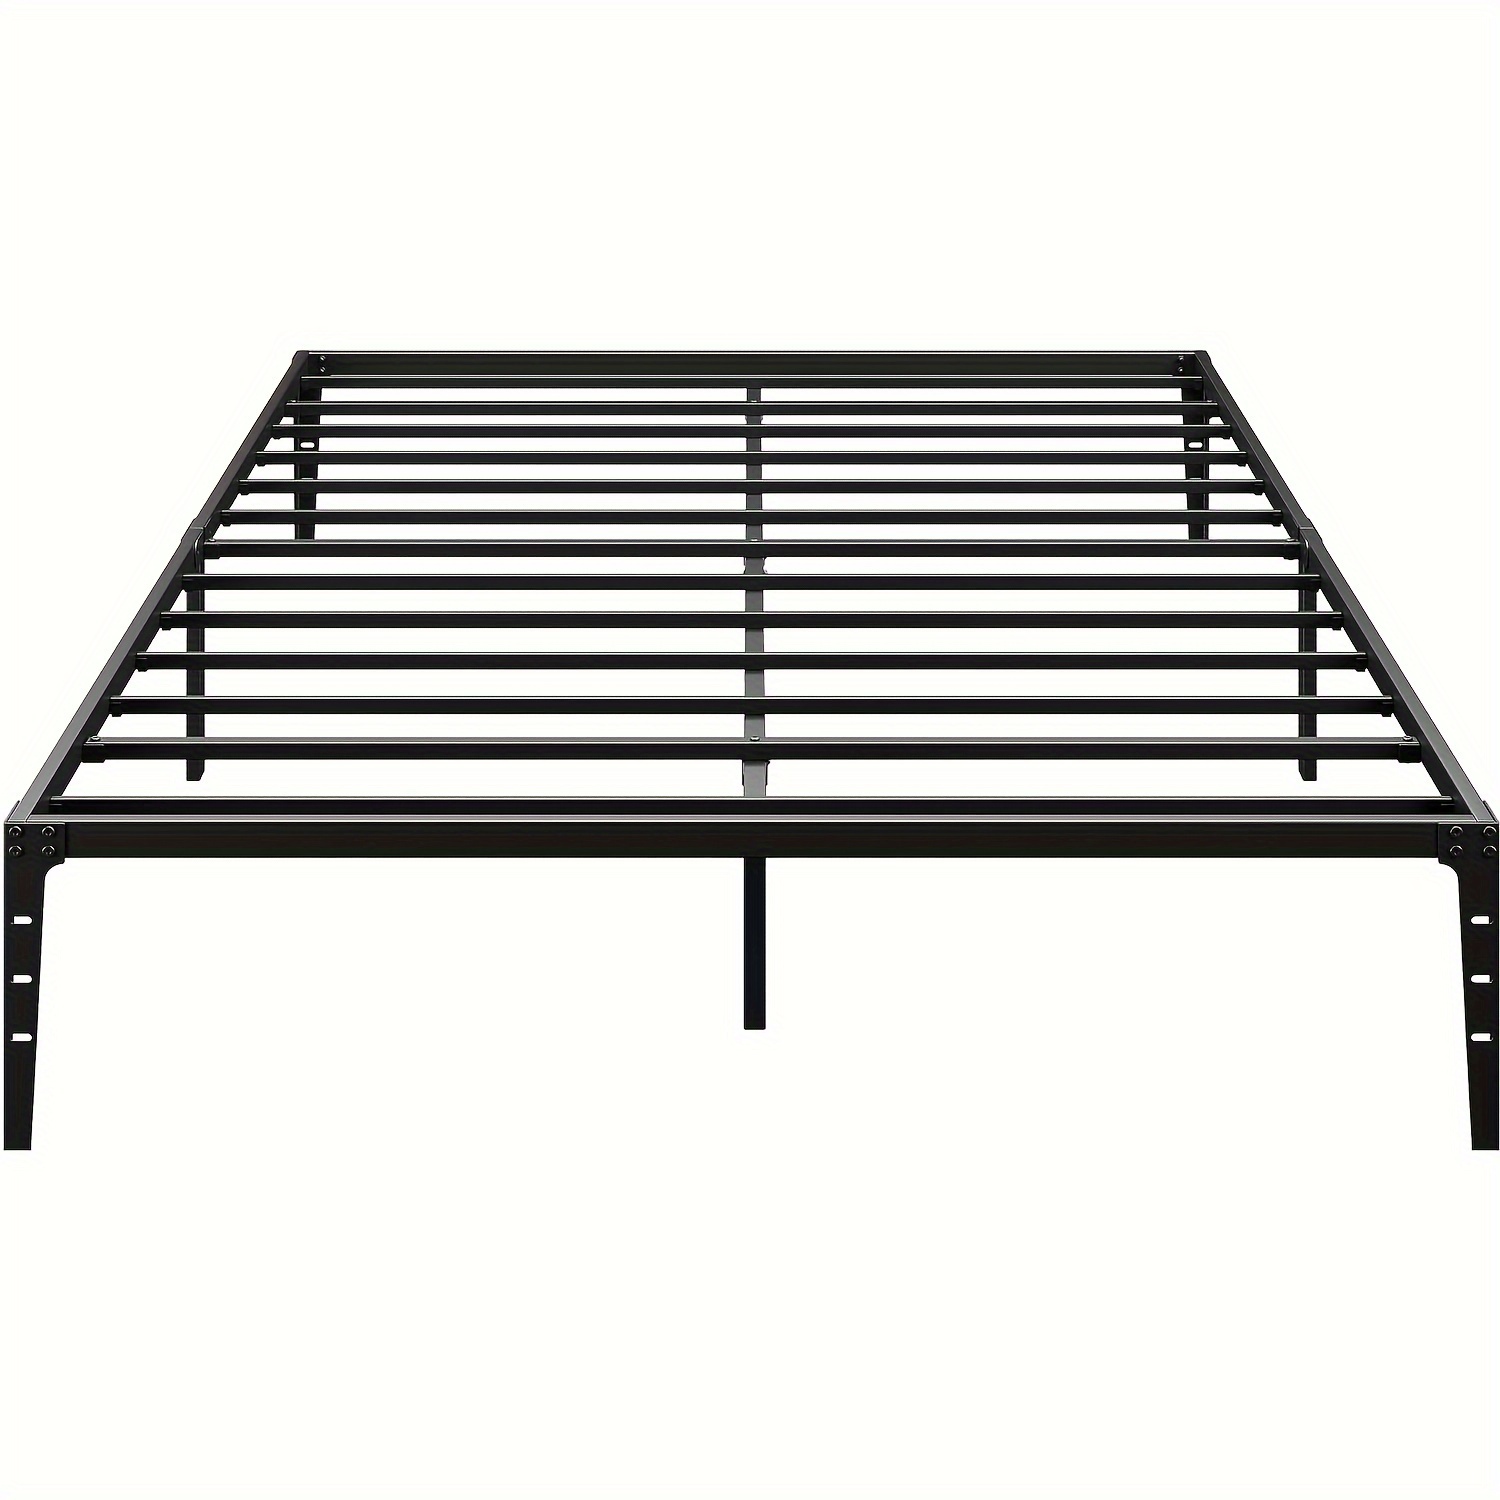 

1pc Metal Platform Bed Frame, 14", Heavy Duty Steel Slats, No Box Spring Required, Easy To Assemble, Noiseless, Black